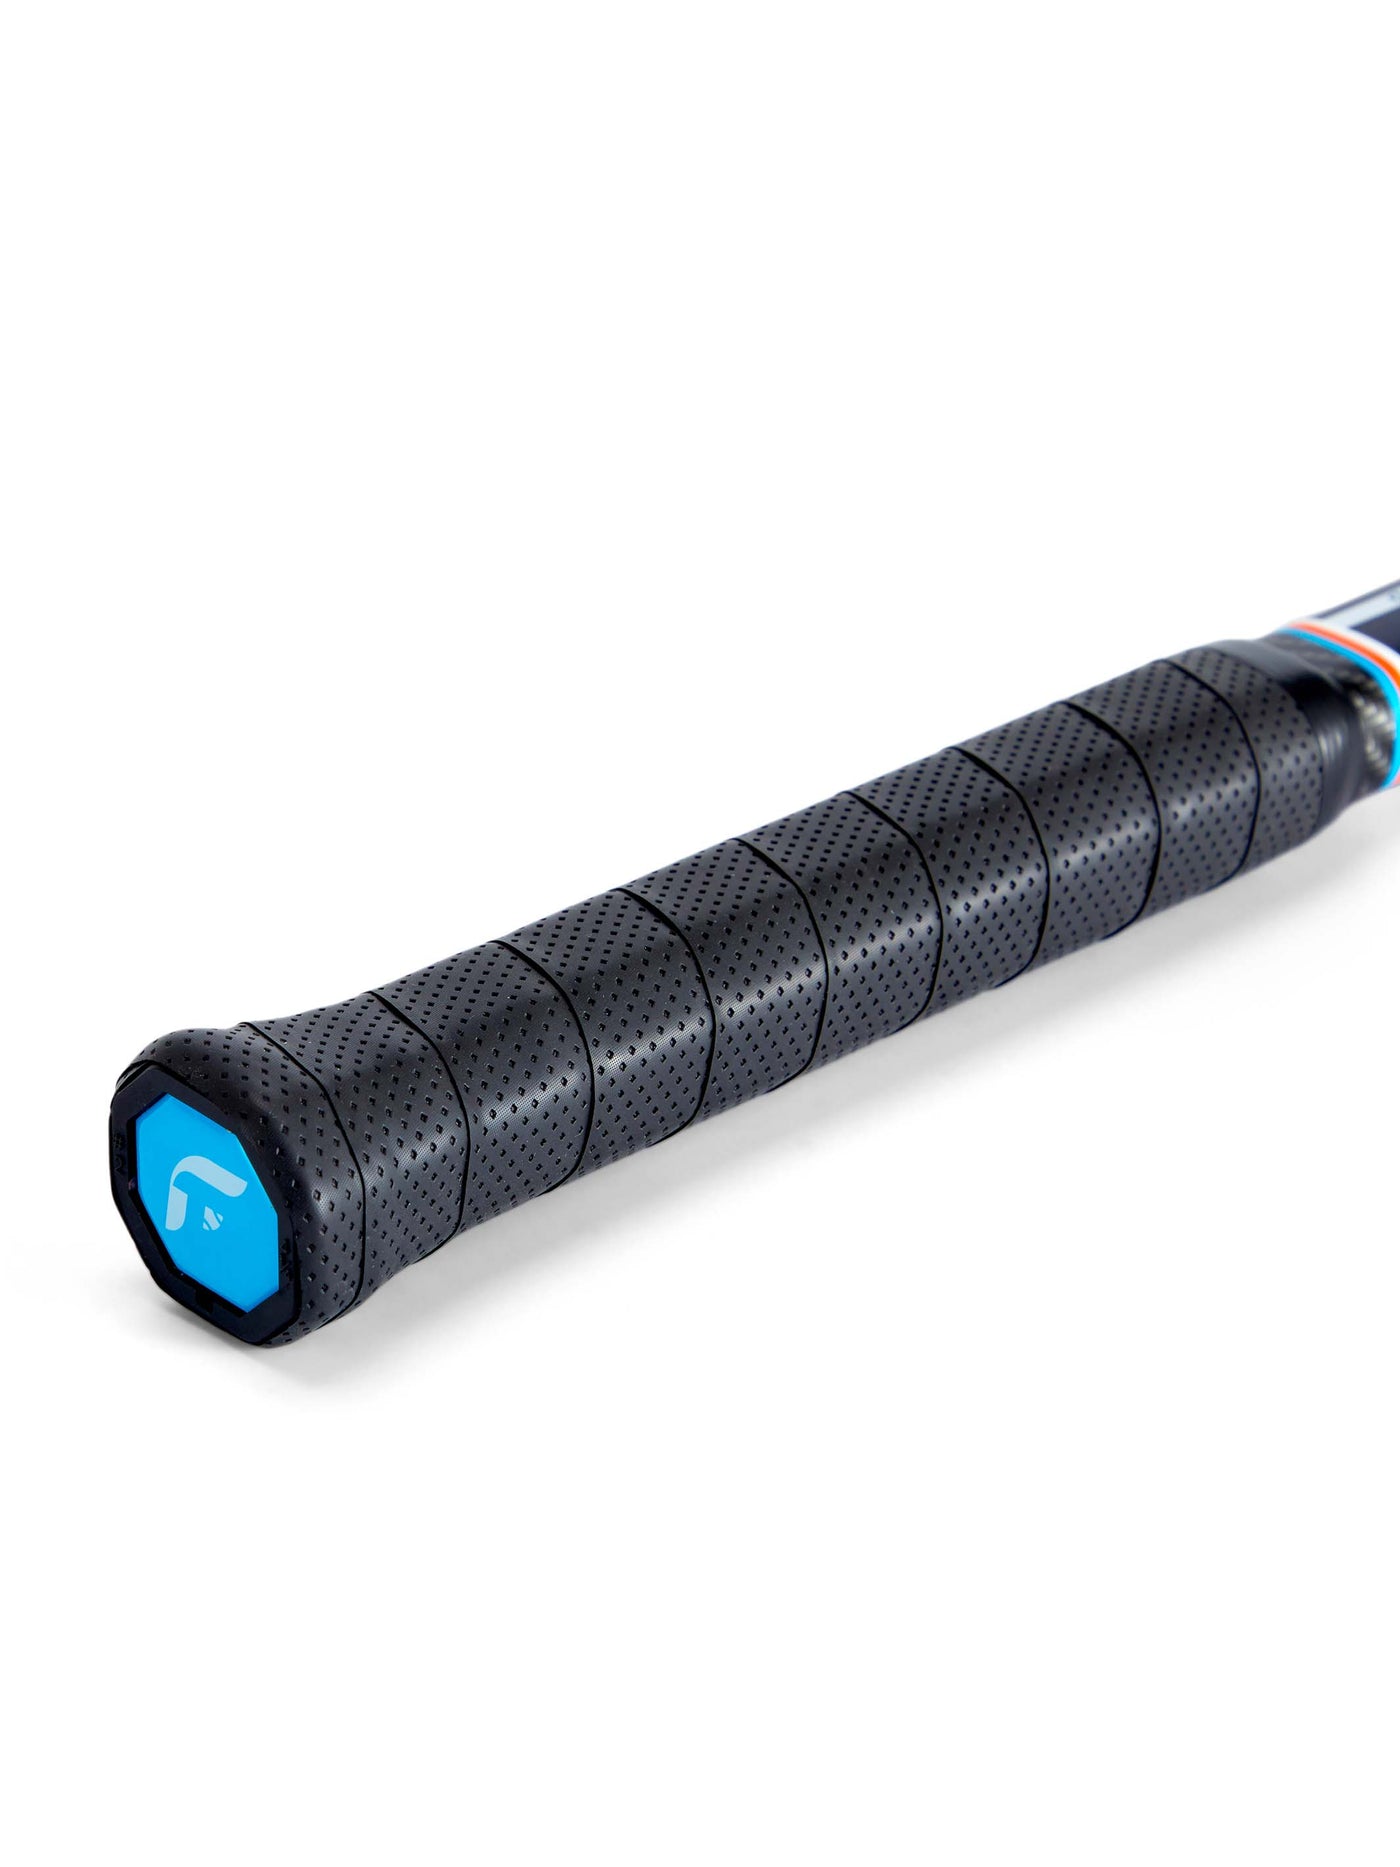 The Functional Tennis Saber